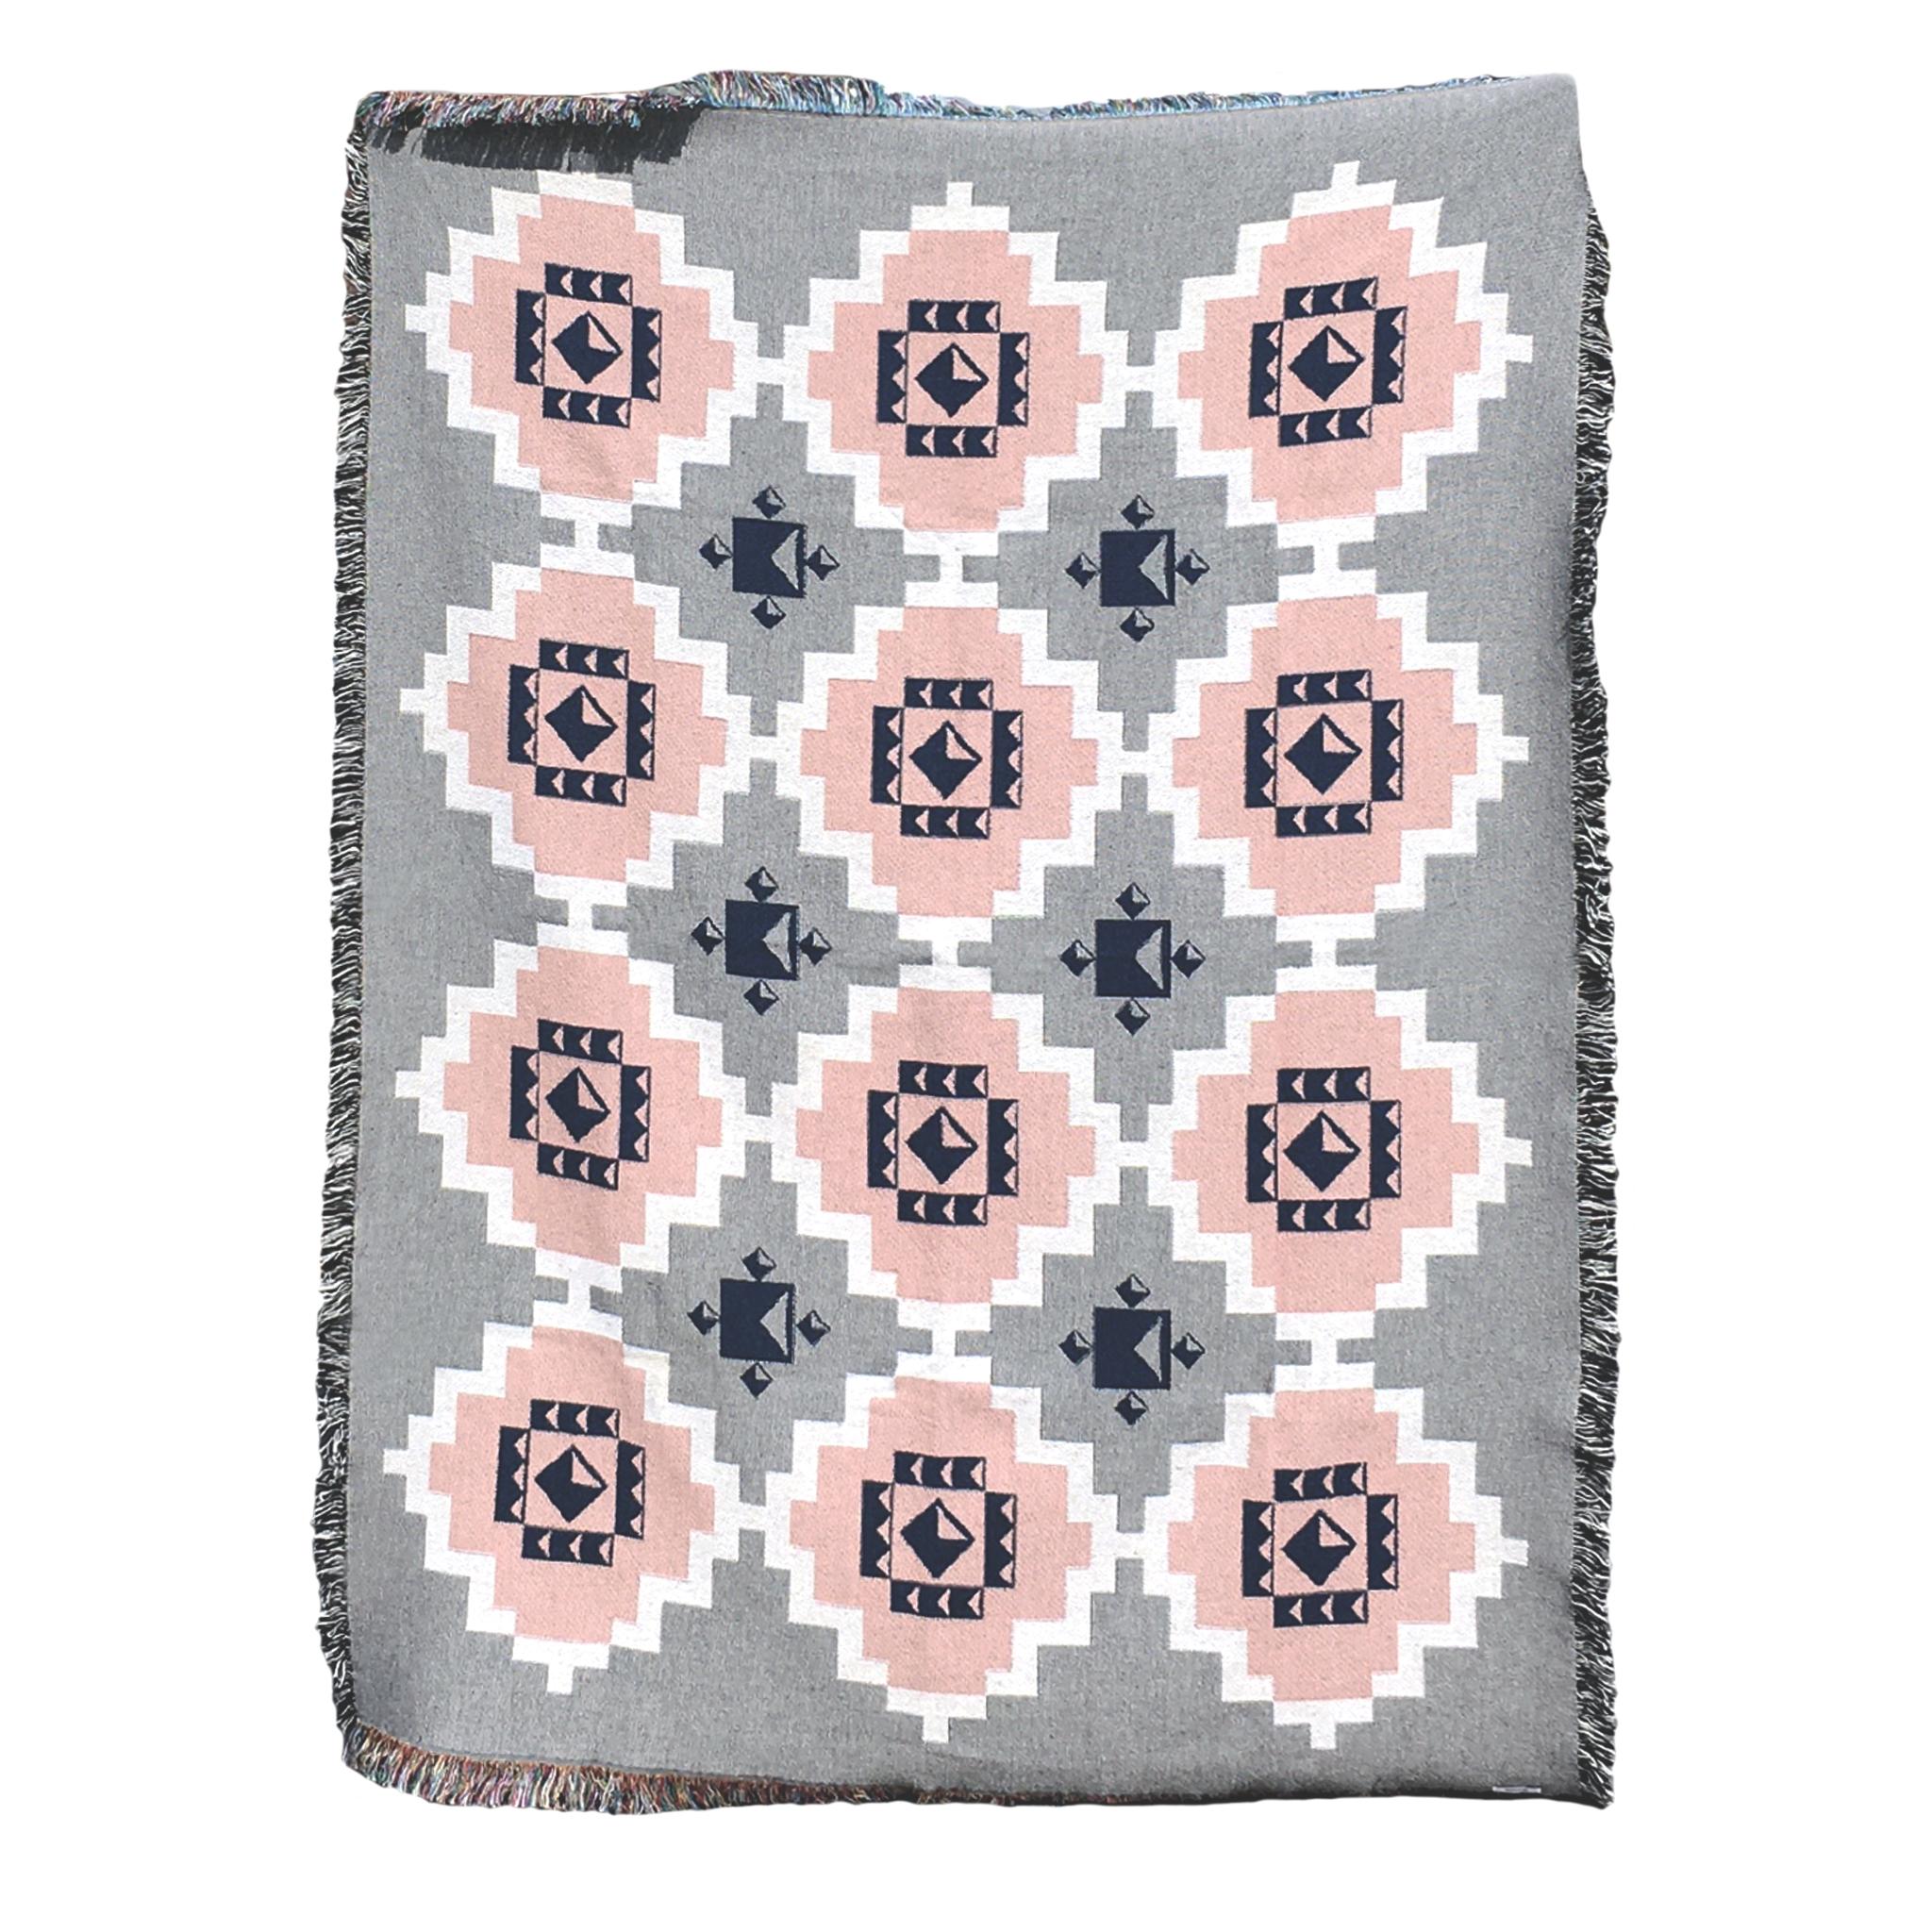 American Loom Woven Cotton Throw Blanket, Gray and Pink Coverlet Geo, 54 x 72 For Sale